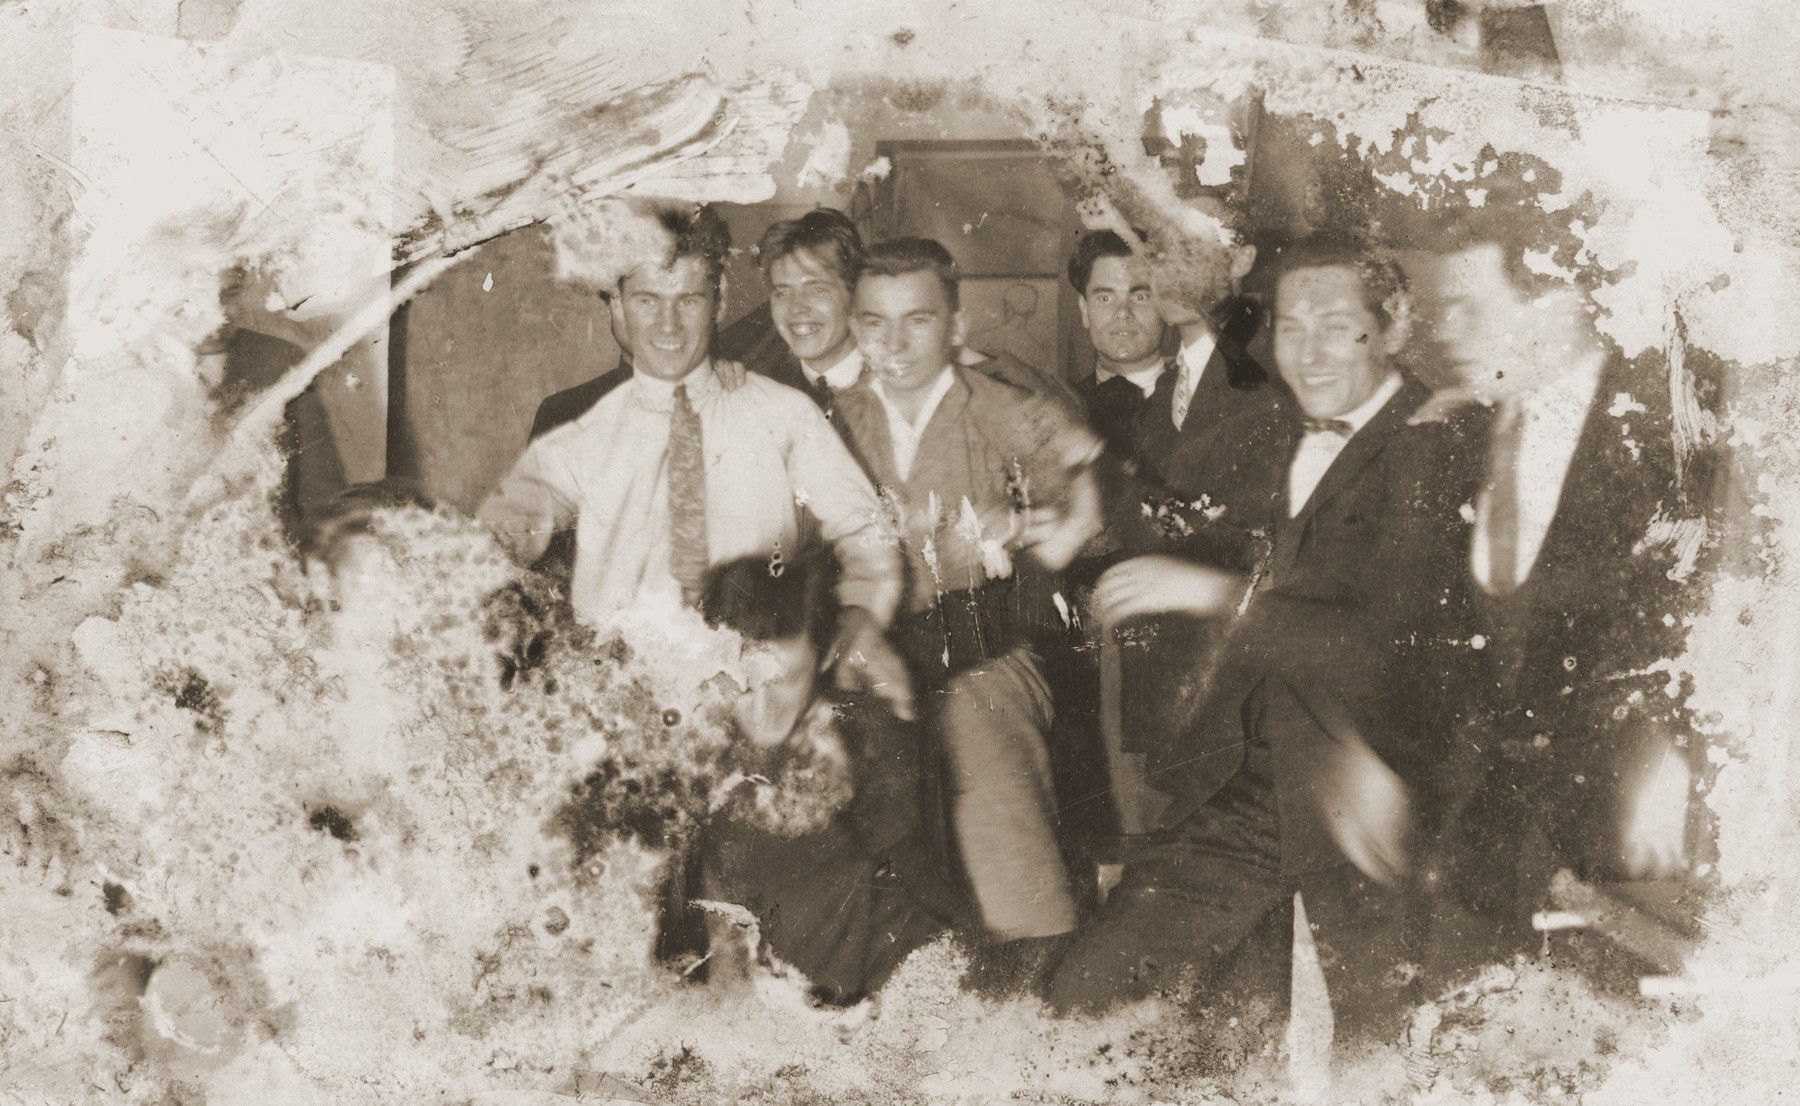 Damaged photograph of a group of male friends in Kovno, Lithuania that survived the destruction of the Kovno ghetto.

Among those pictured is the artist Jacob Lifschitz (center).  The photograph was buried with the artist's drawings shortly before the liquidation of the ghetto, and retrieved by his wife after the liberation.